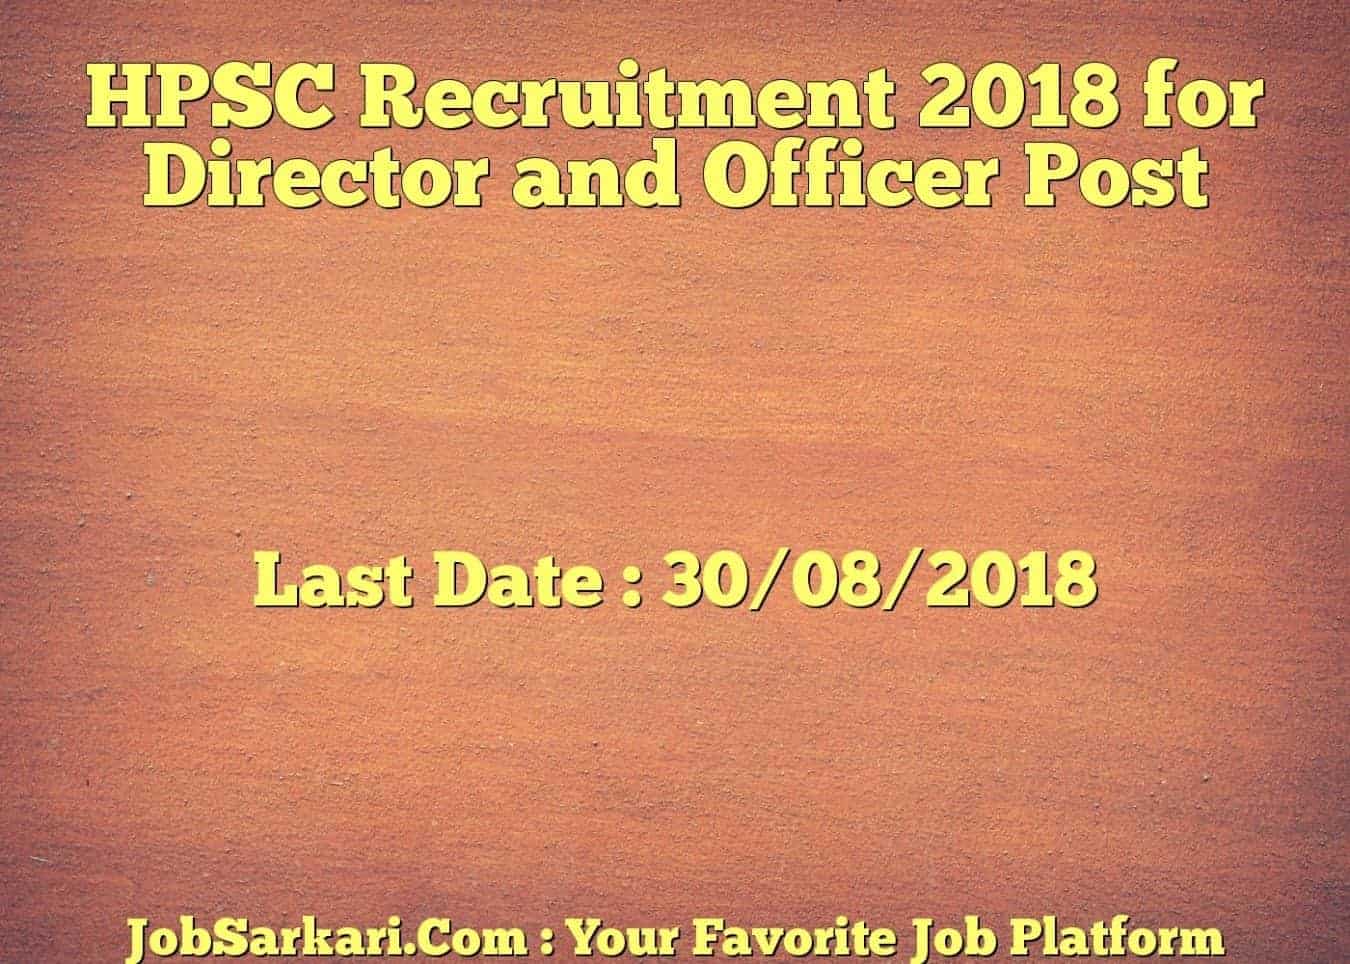 HPSC Recruitment 2018 for Director and Officer Post